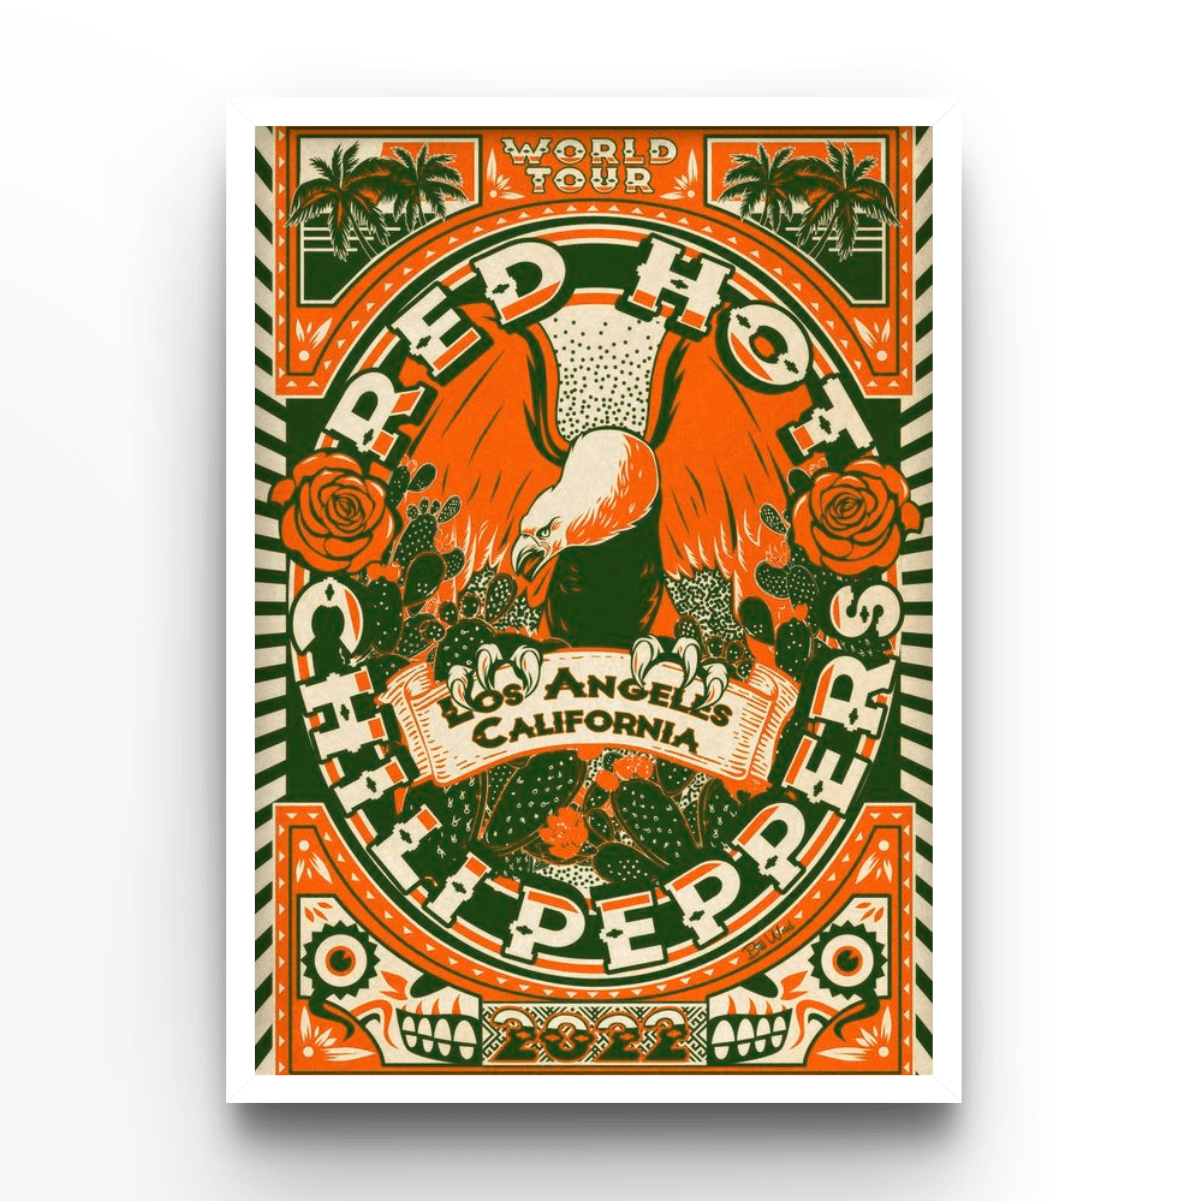 Red Hot Chili Peppers California - A4, A3, A2 Posters Base - Poster Print Shop / Art Prints / PostersBase